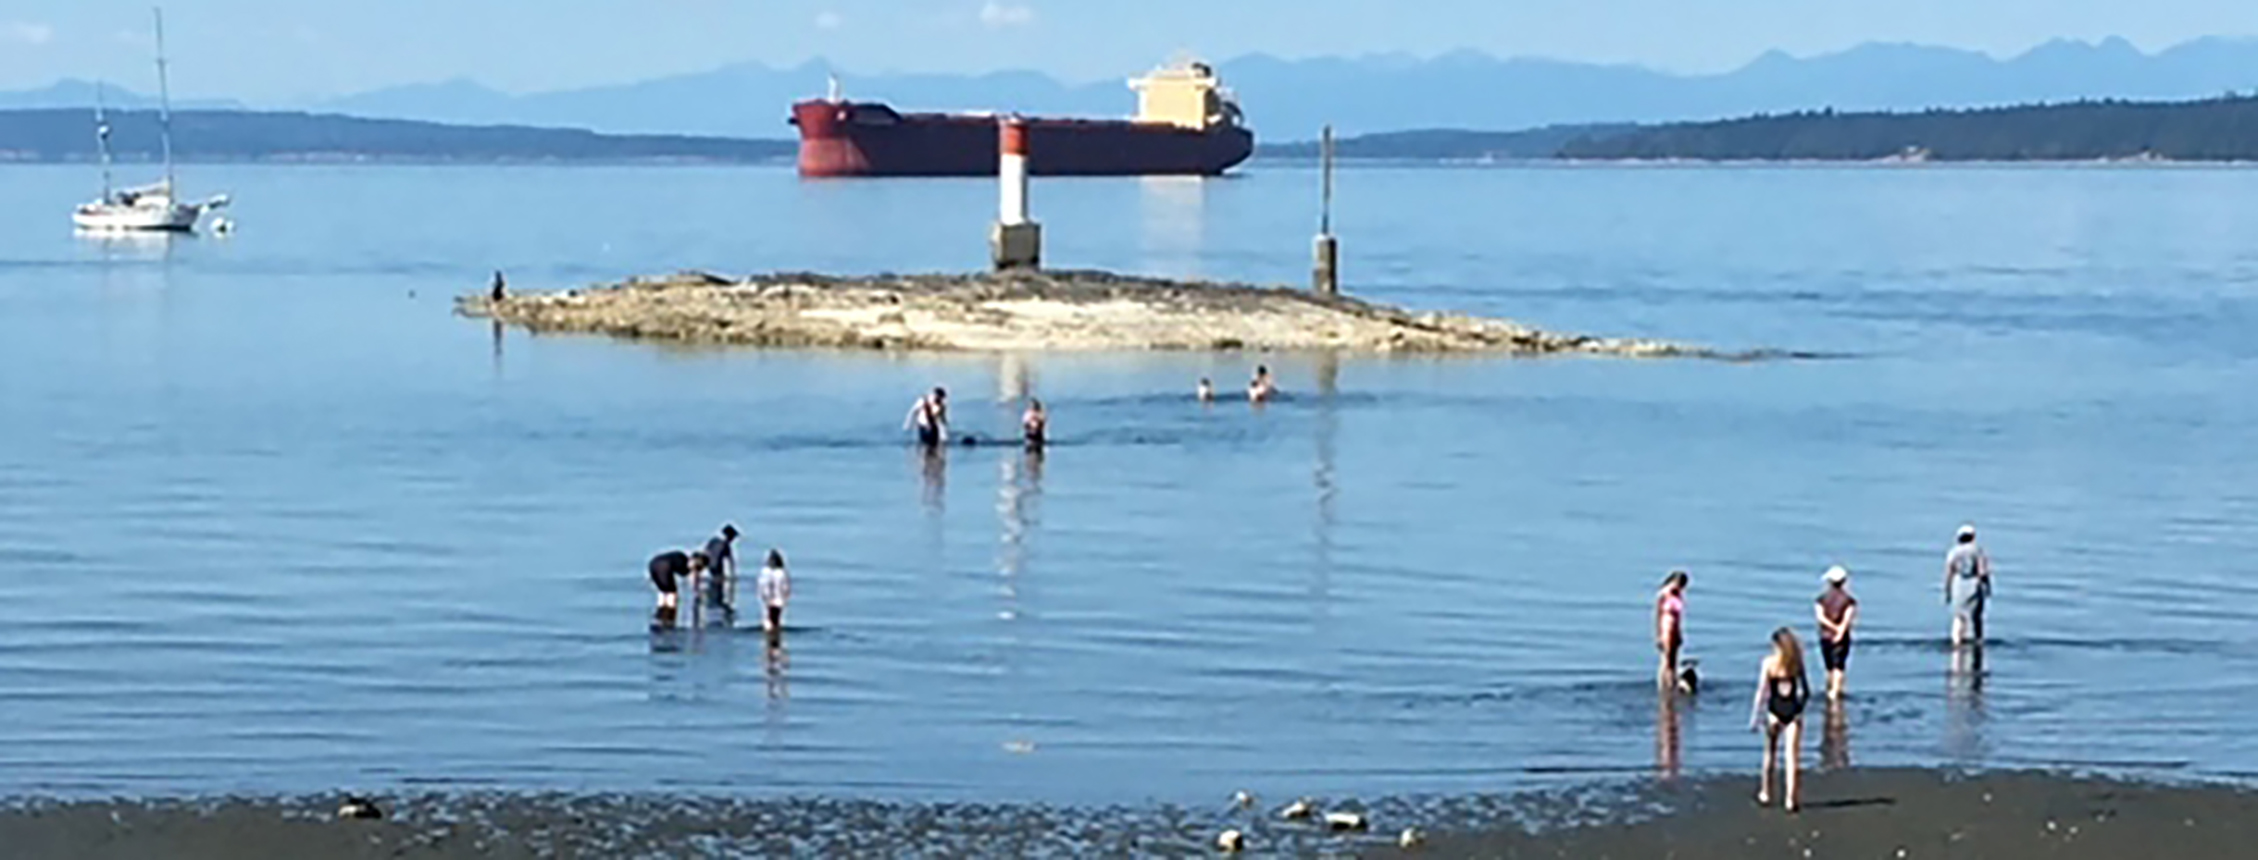 Chemainus public beach in summer with people recreating in the ocean, a reef in the middle ground, and a freighter in the nearby background, photo submitted by Freighter Free Chemainus.